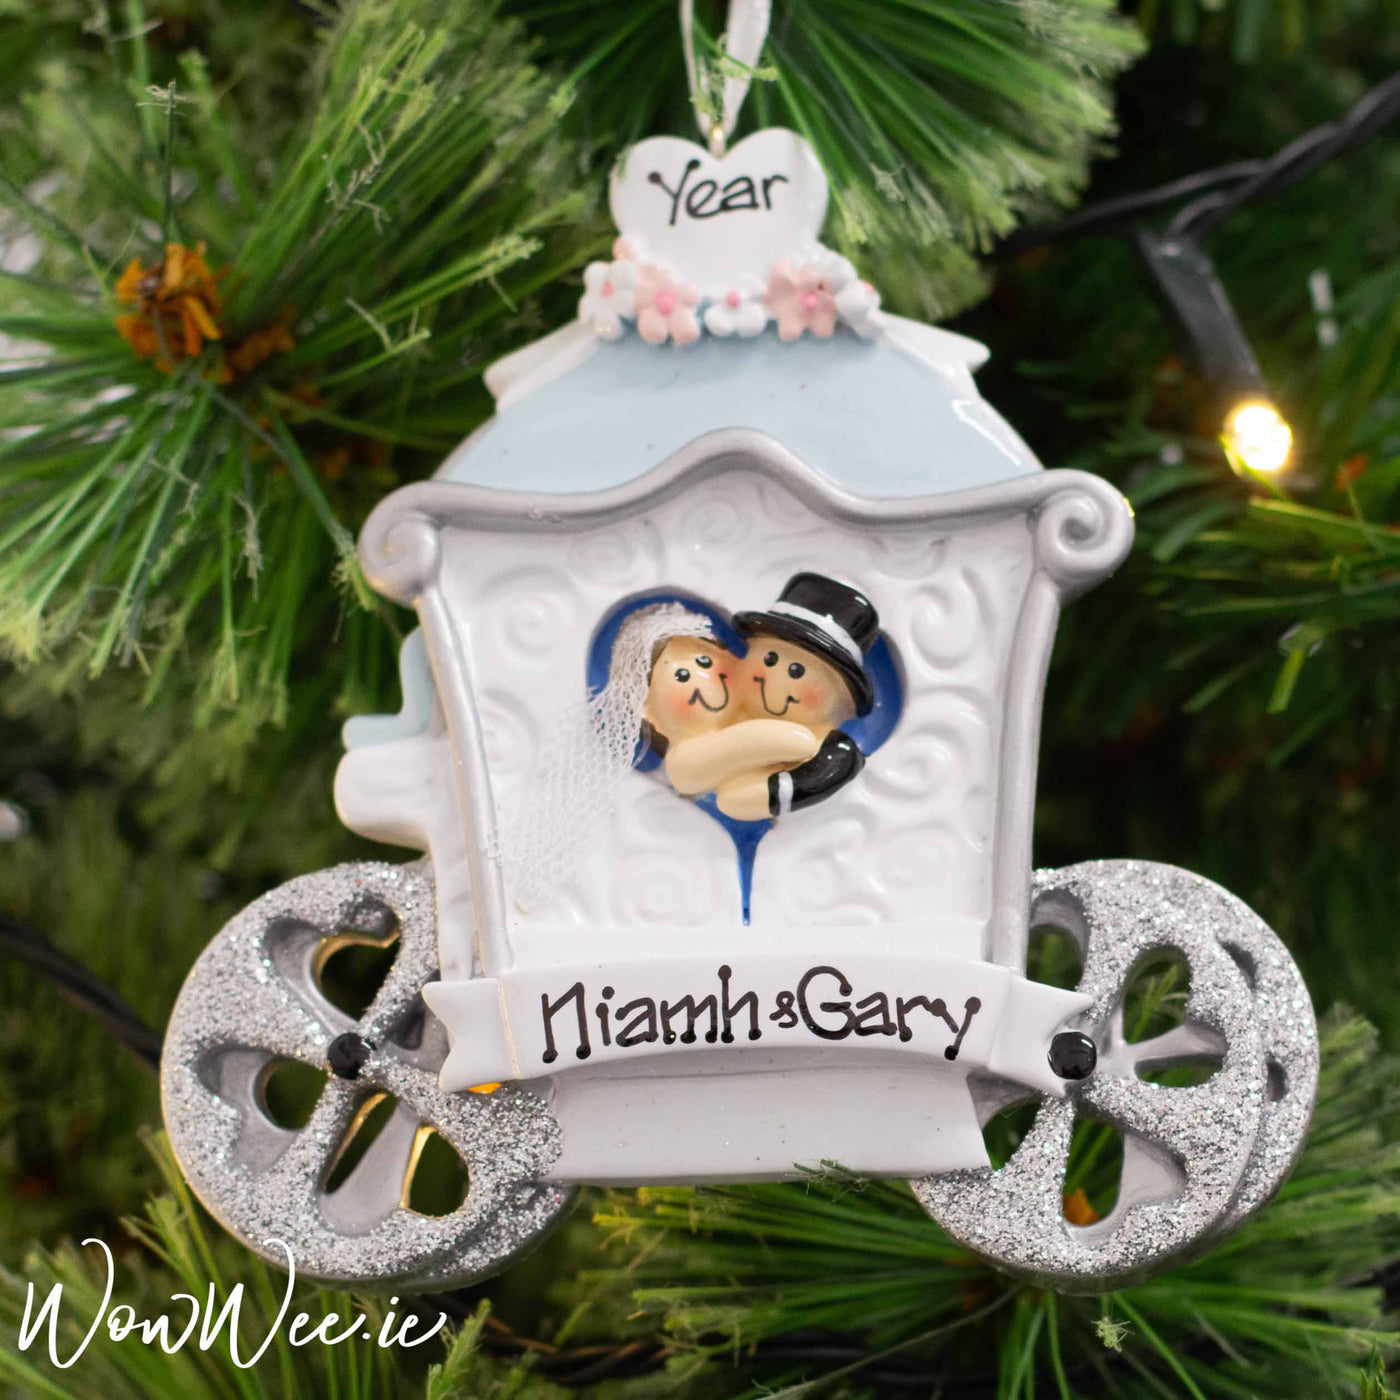 Personalised Christmas Ornament - Wedding Carriage - WowWee.ie Personalised Gifts